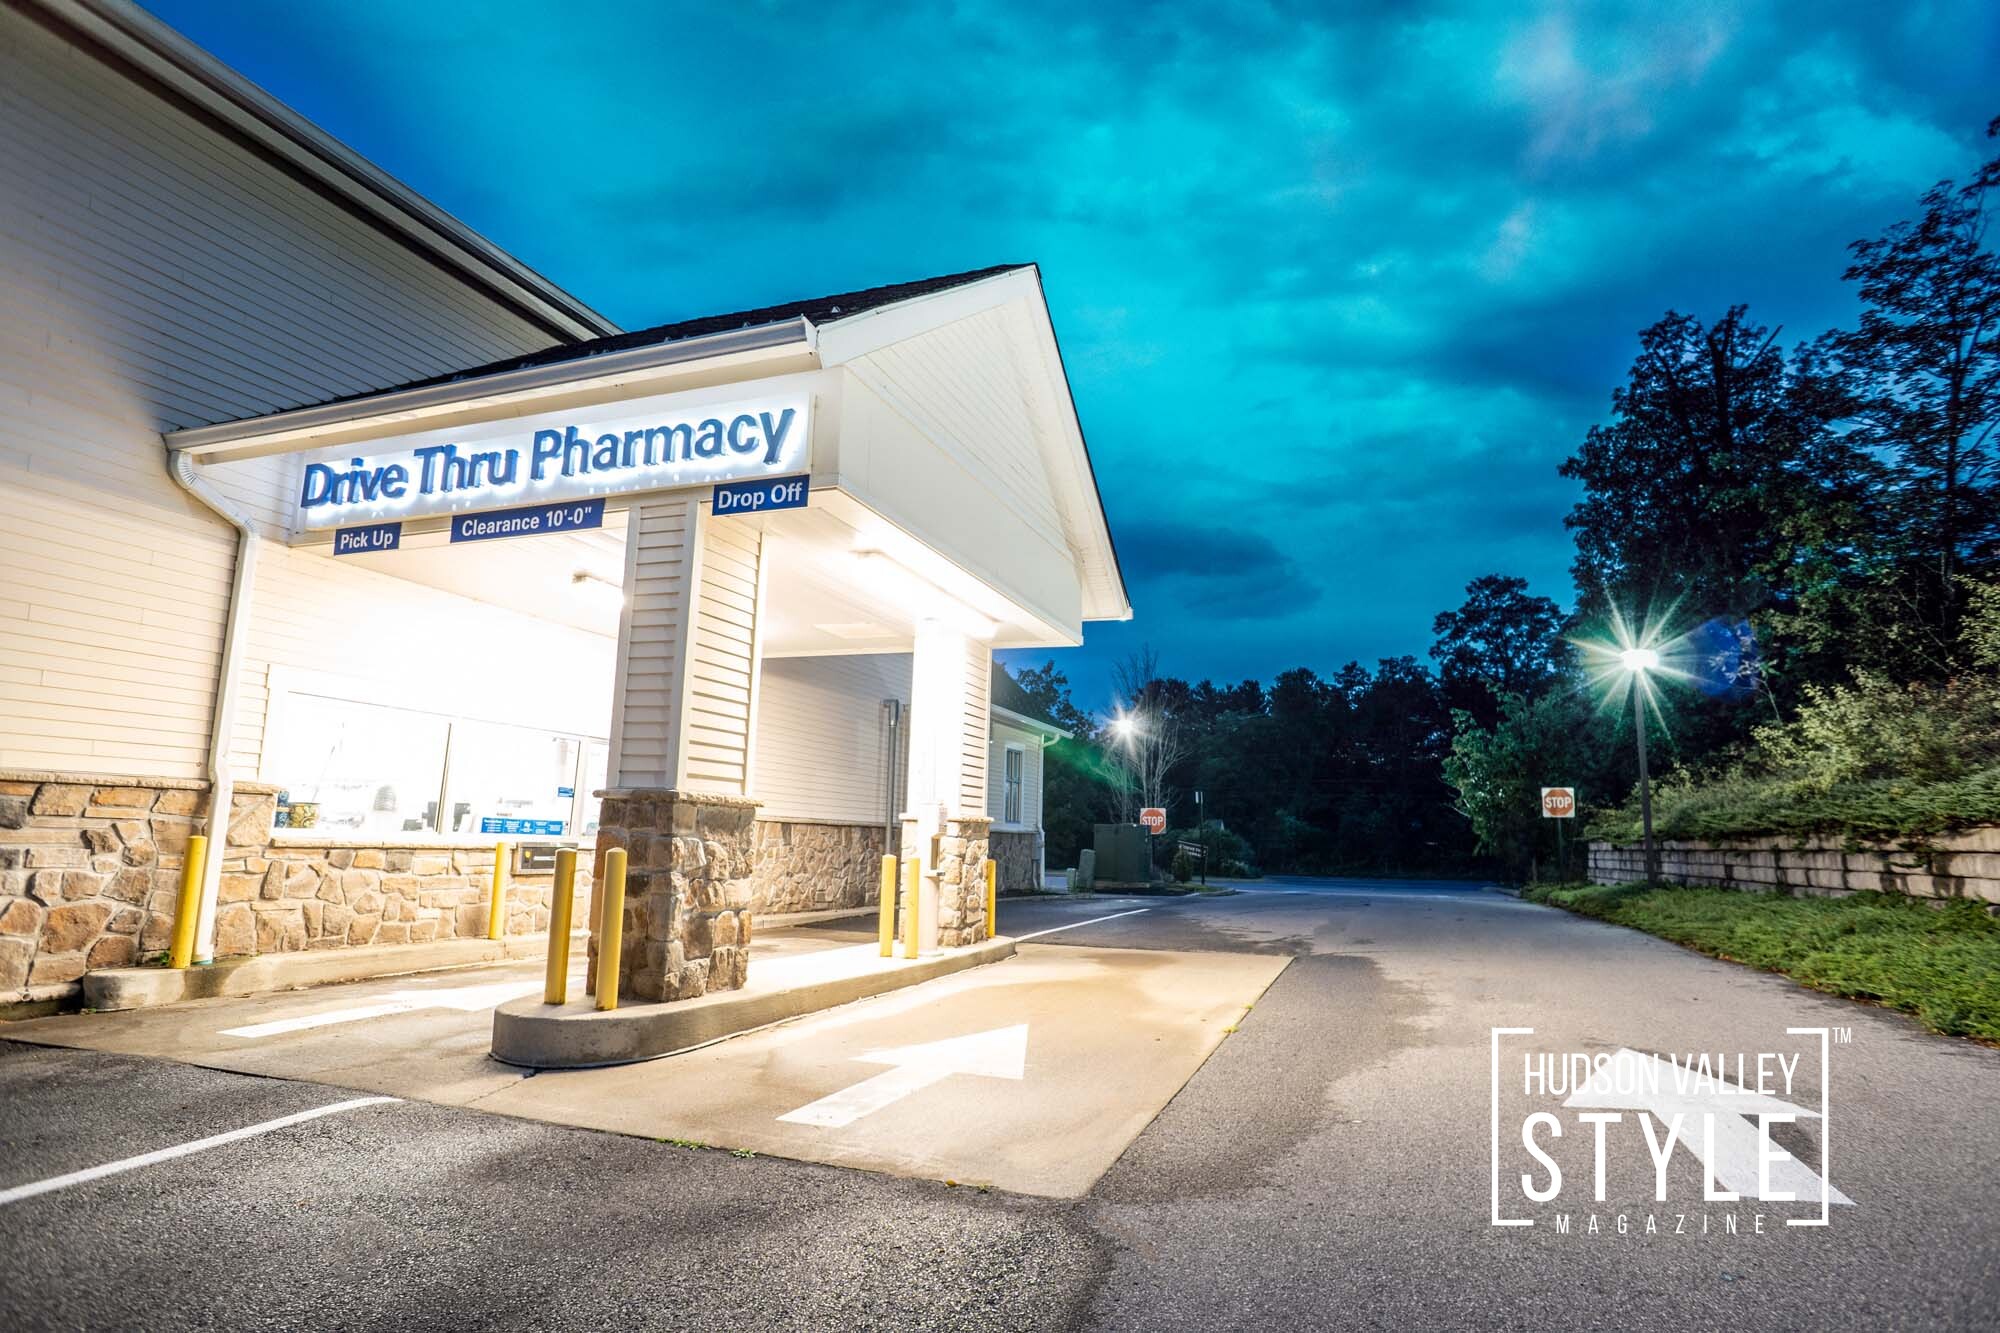 Rite Aid Hudson Valley - Twilight Photography - Commercial Real Estate Photography Project by Duncan Avenue Studios - Hudson Valley, Catskills and Westchester, New York